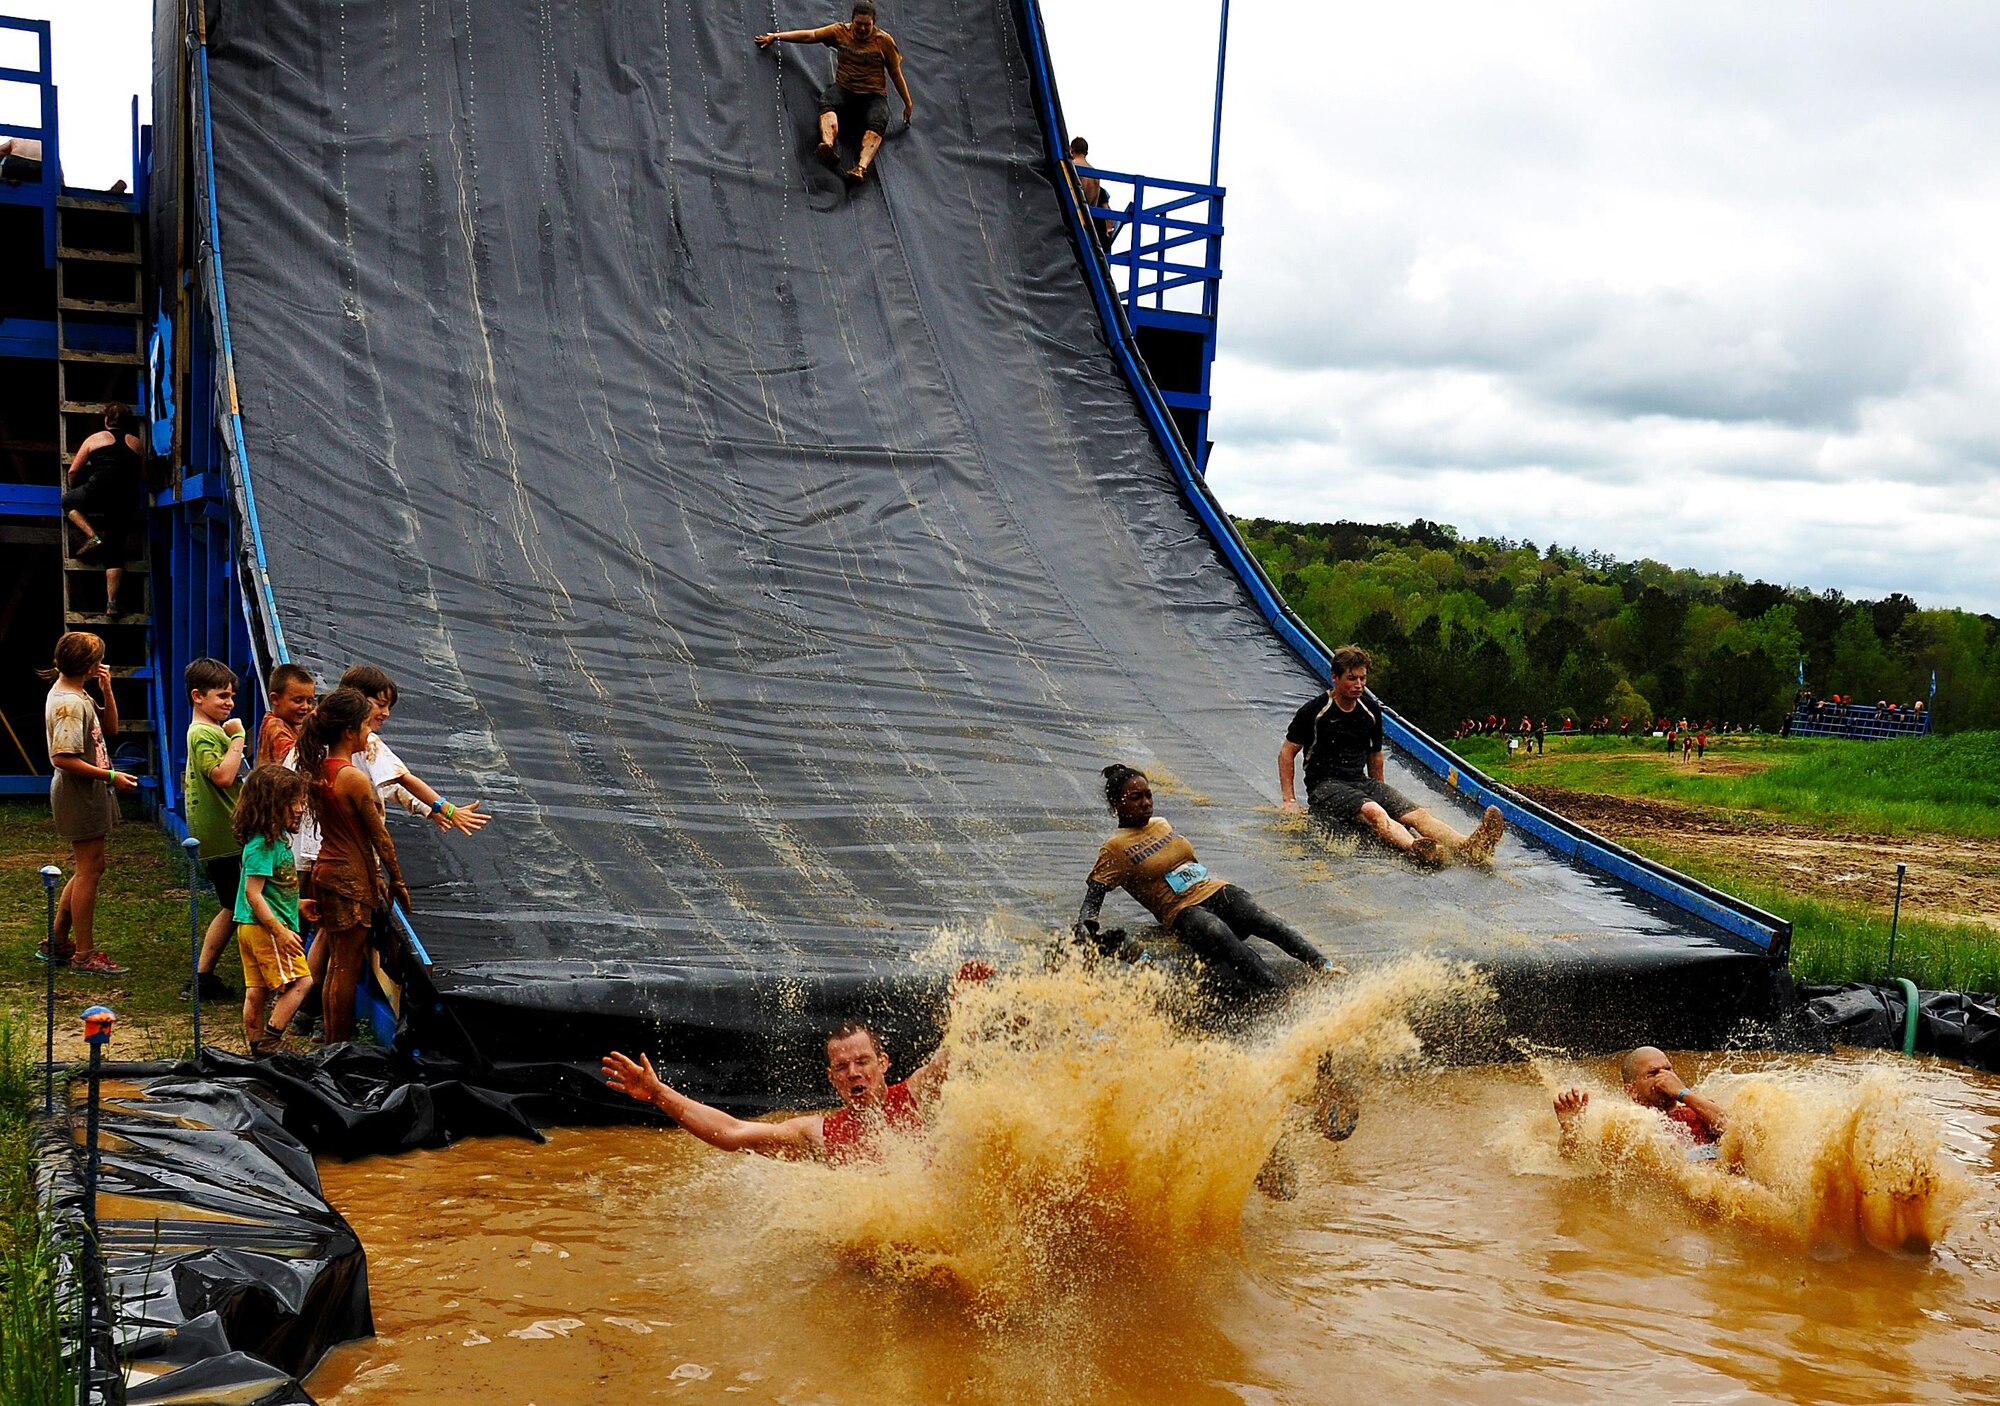 Members of Dobbins Air Reserve Base slide into a pool of water after making it to the top of the Colossus during the Georgia Spring 2015 Savage Race in Dallas, Ga., April 18, 2015. The Colossus was a giant 43-foot wall and one of the hardest obstacles in the course. Adding to the difficulty of it being one of the final obstacles, runners had to sprint up the barrier after they’d already sledged through more than four miles in the mud, before grabbing a rope. They would then pull themselves up to the top of the fortification. The Savage Race is an Air Force Reserve sponsored obstacle course that challenges participants in more than 20 different trials over the course of five miles. (U.S. Air Force photo/Senior Airman Daniel Phelps)